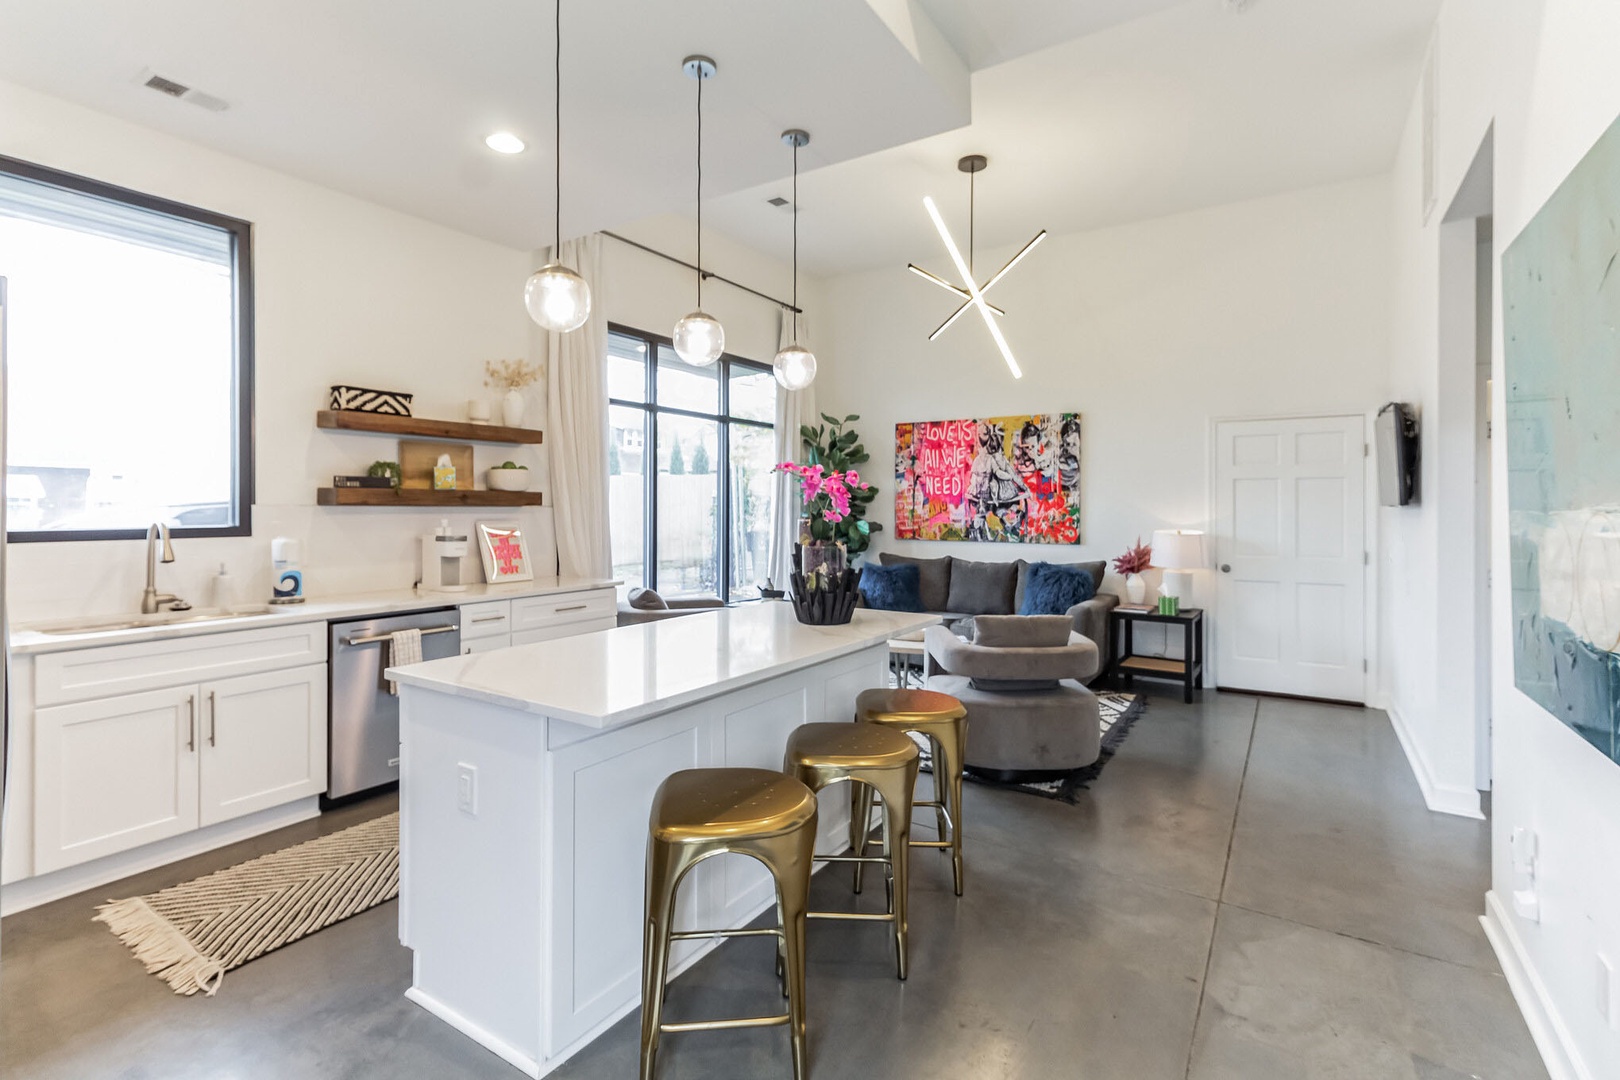 Sip morning coffee or grab a bite at the kitchen counter, with space for 3